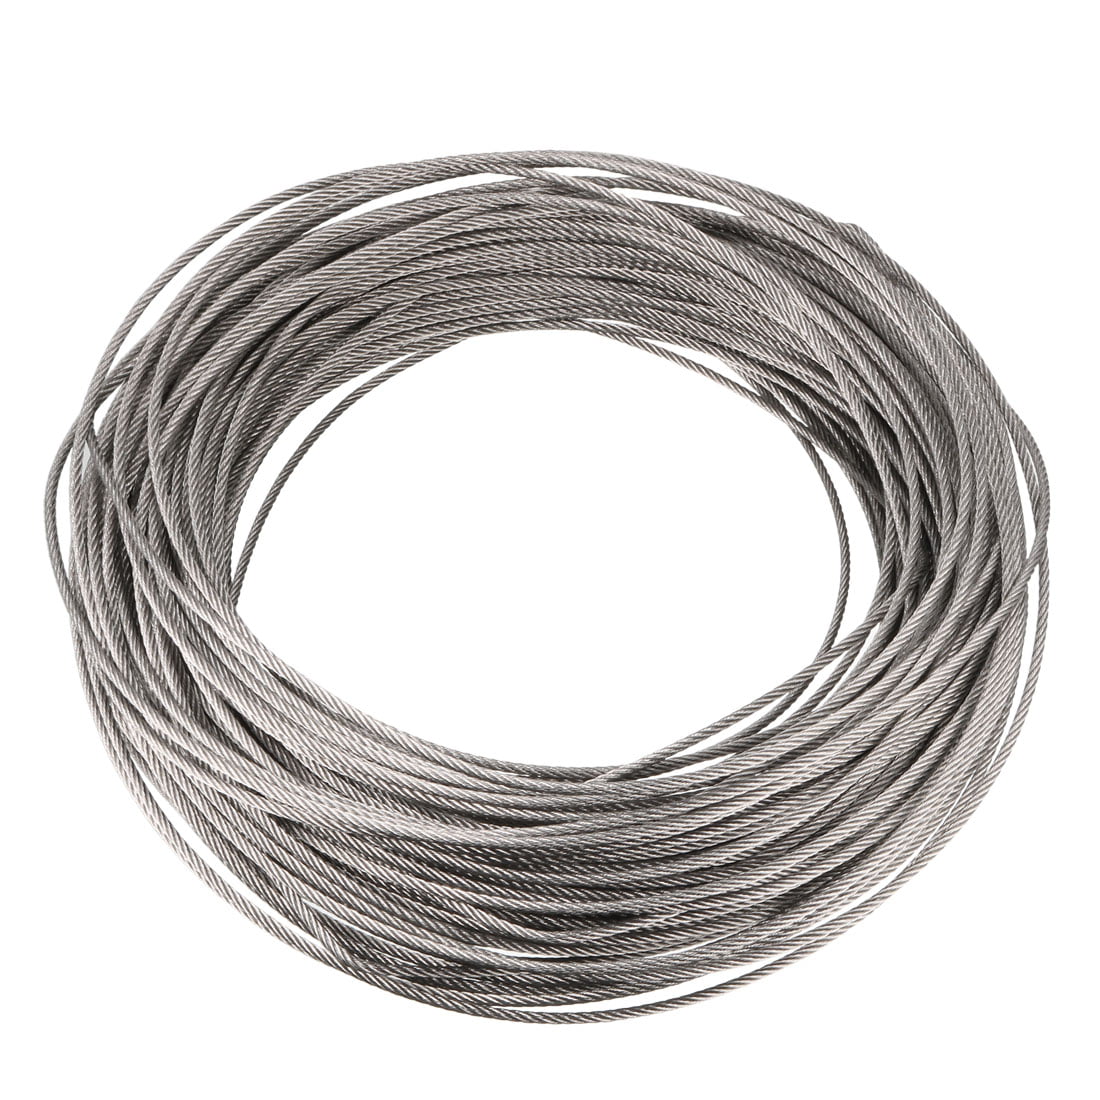  uxcell® 3mm Diameter Flexible Metal Wire Rope Cable 12 Meter  Length : Home & Kitchen